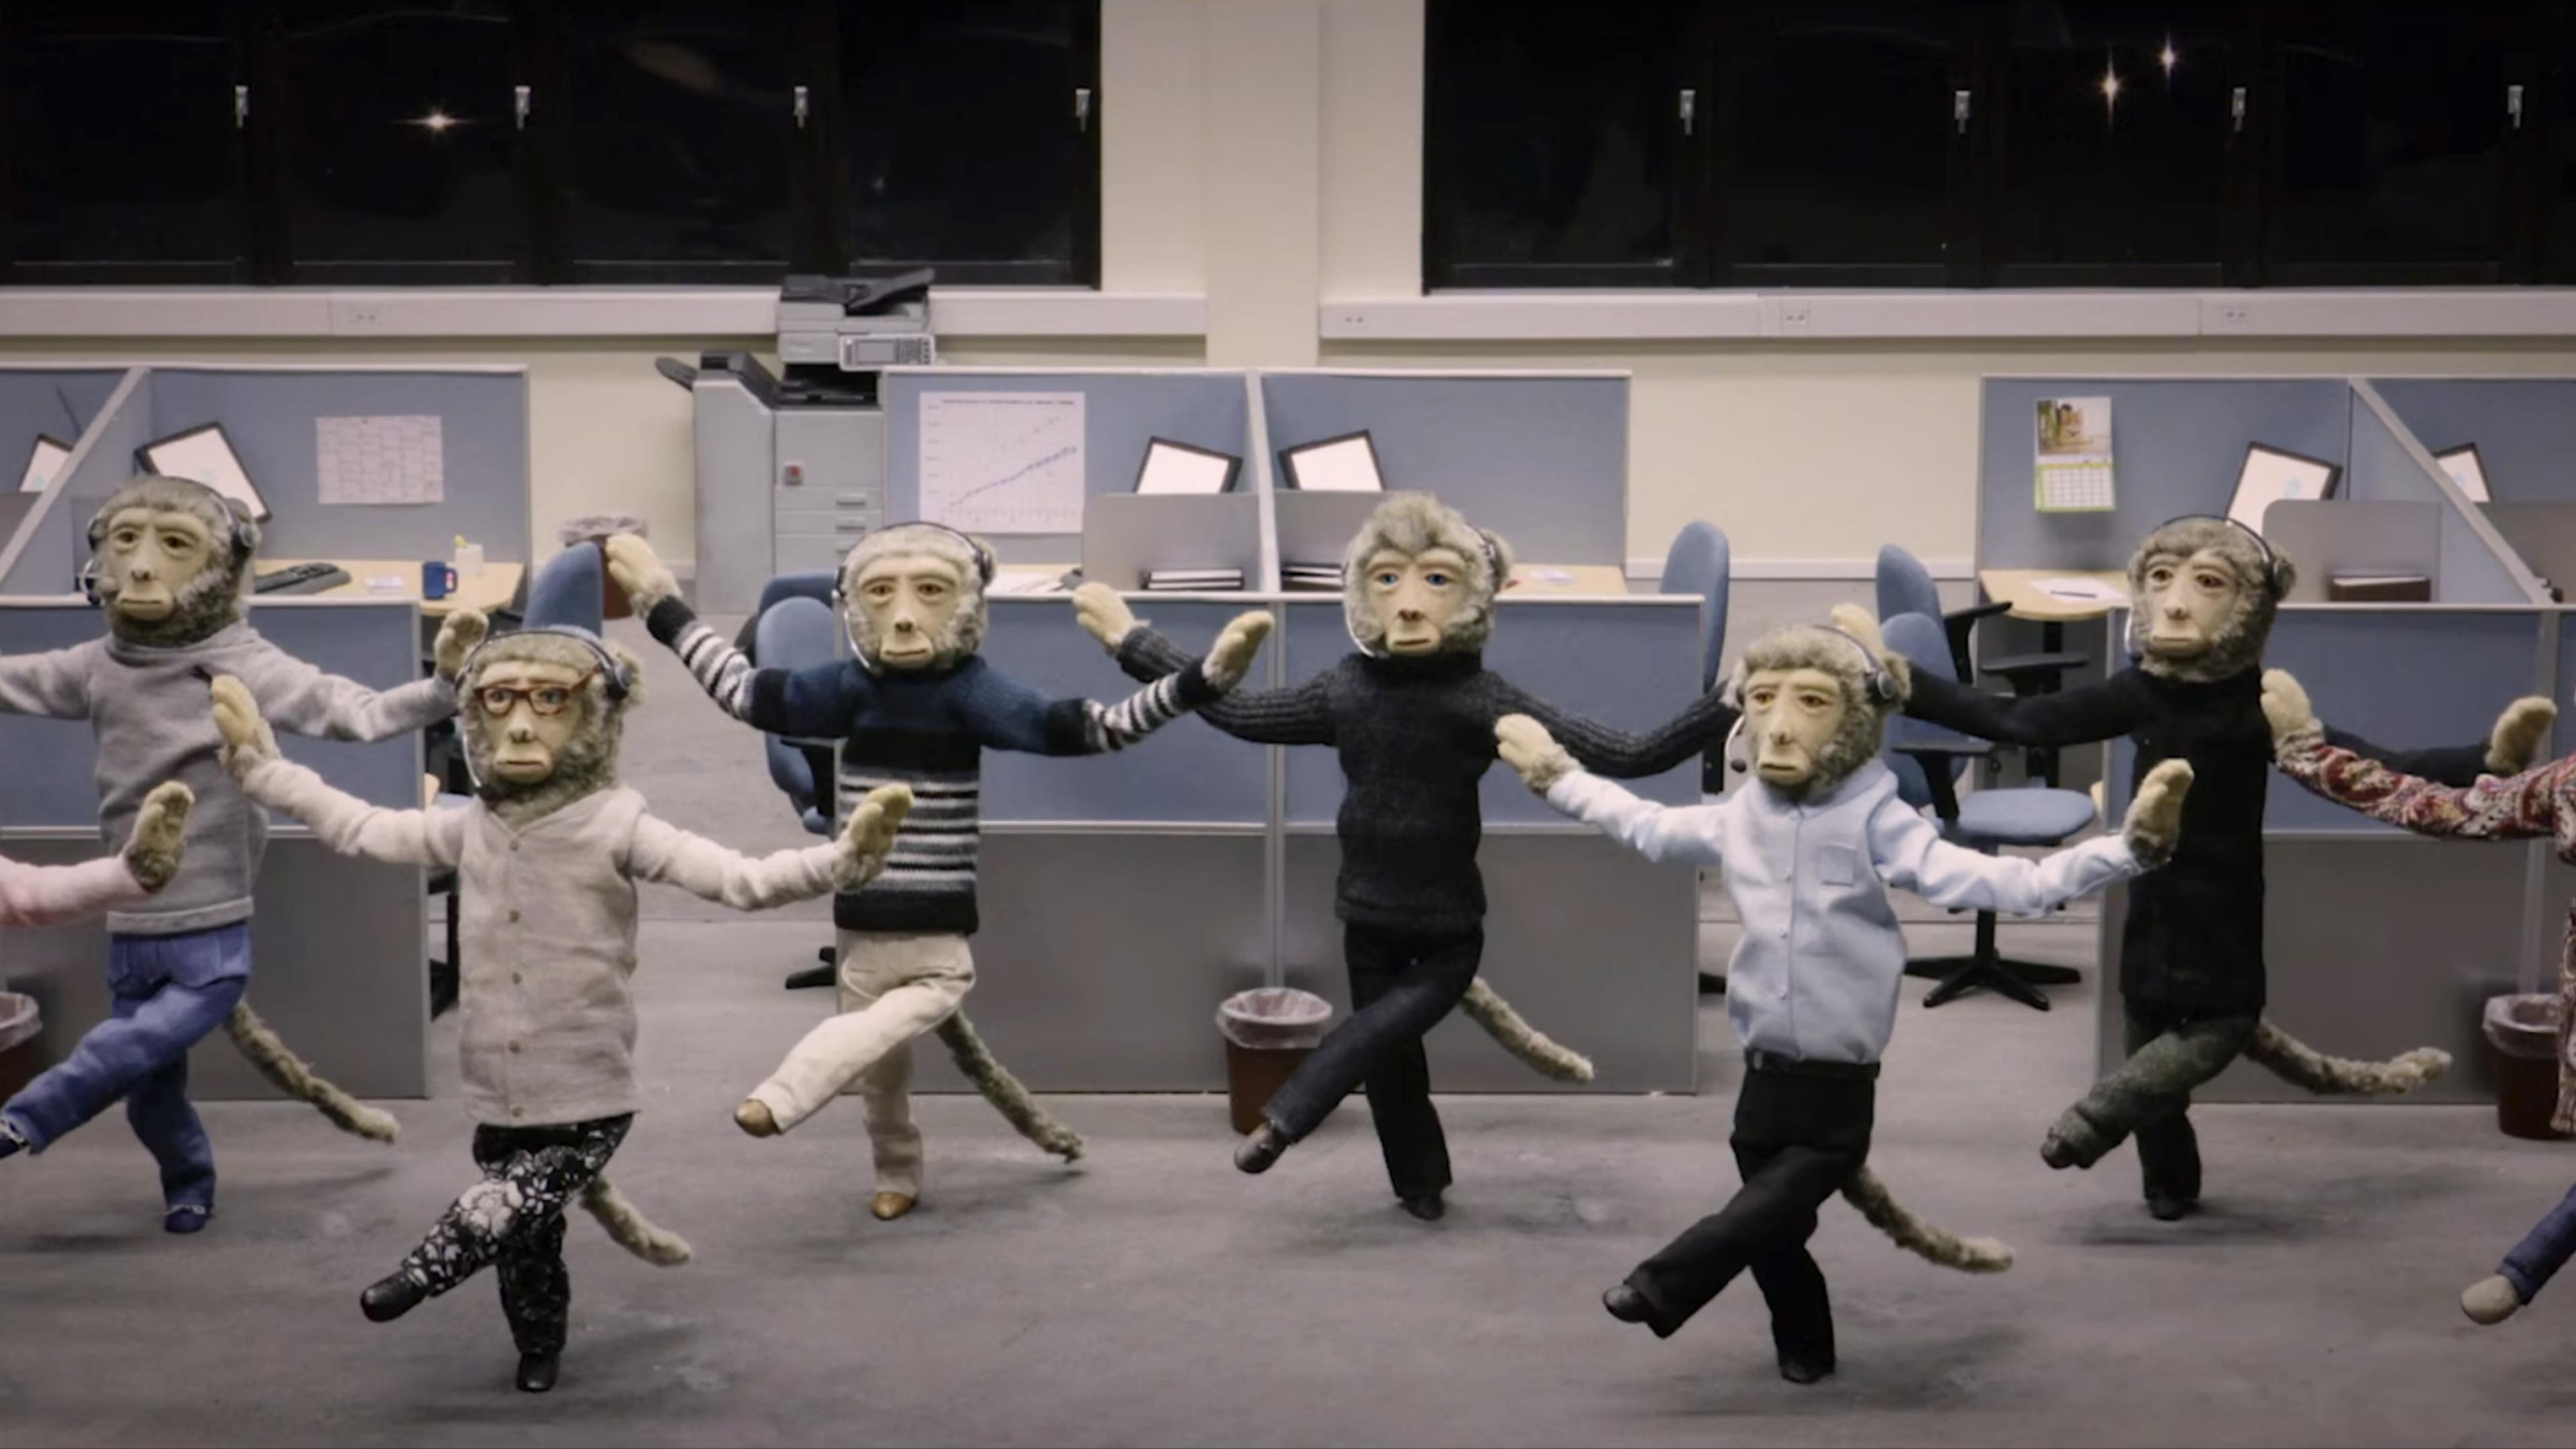 Puppets with monkey faces in office attire, performing a synchronised dance in a cubicle-filled office setting, with computers and office supplies visible.